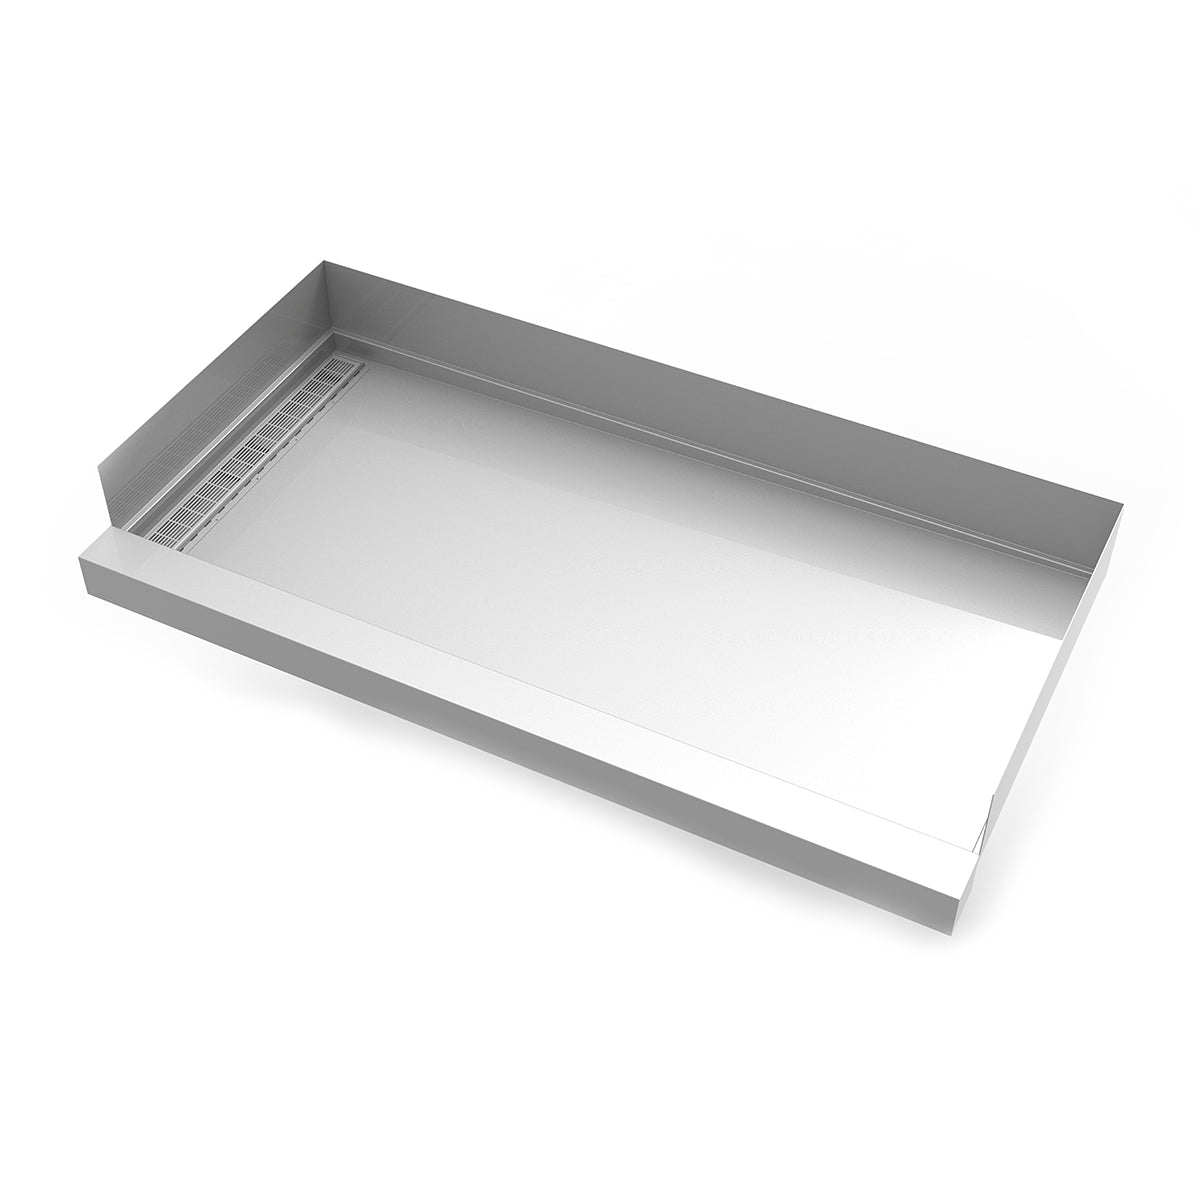 Infinity Drain 30"x 60" Stainless Steel Shower Base with Left Wall Slotted Pattern Linear Drain location